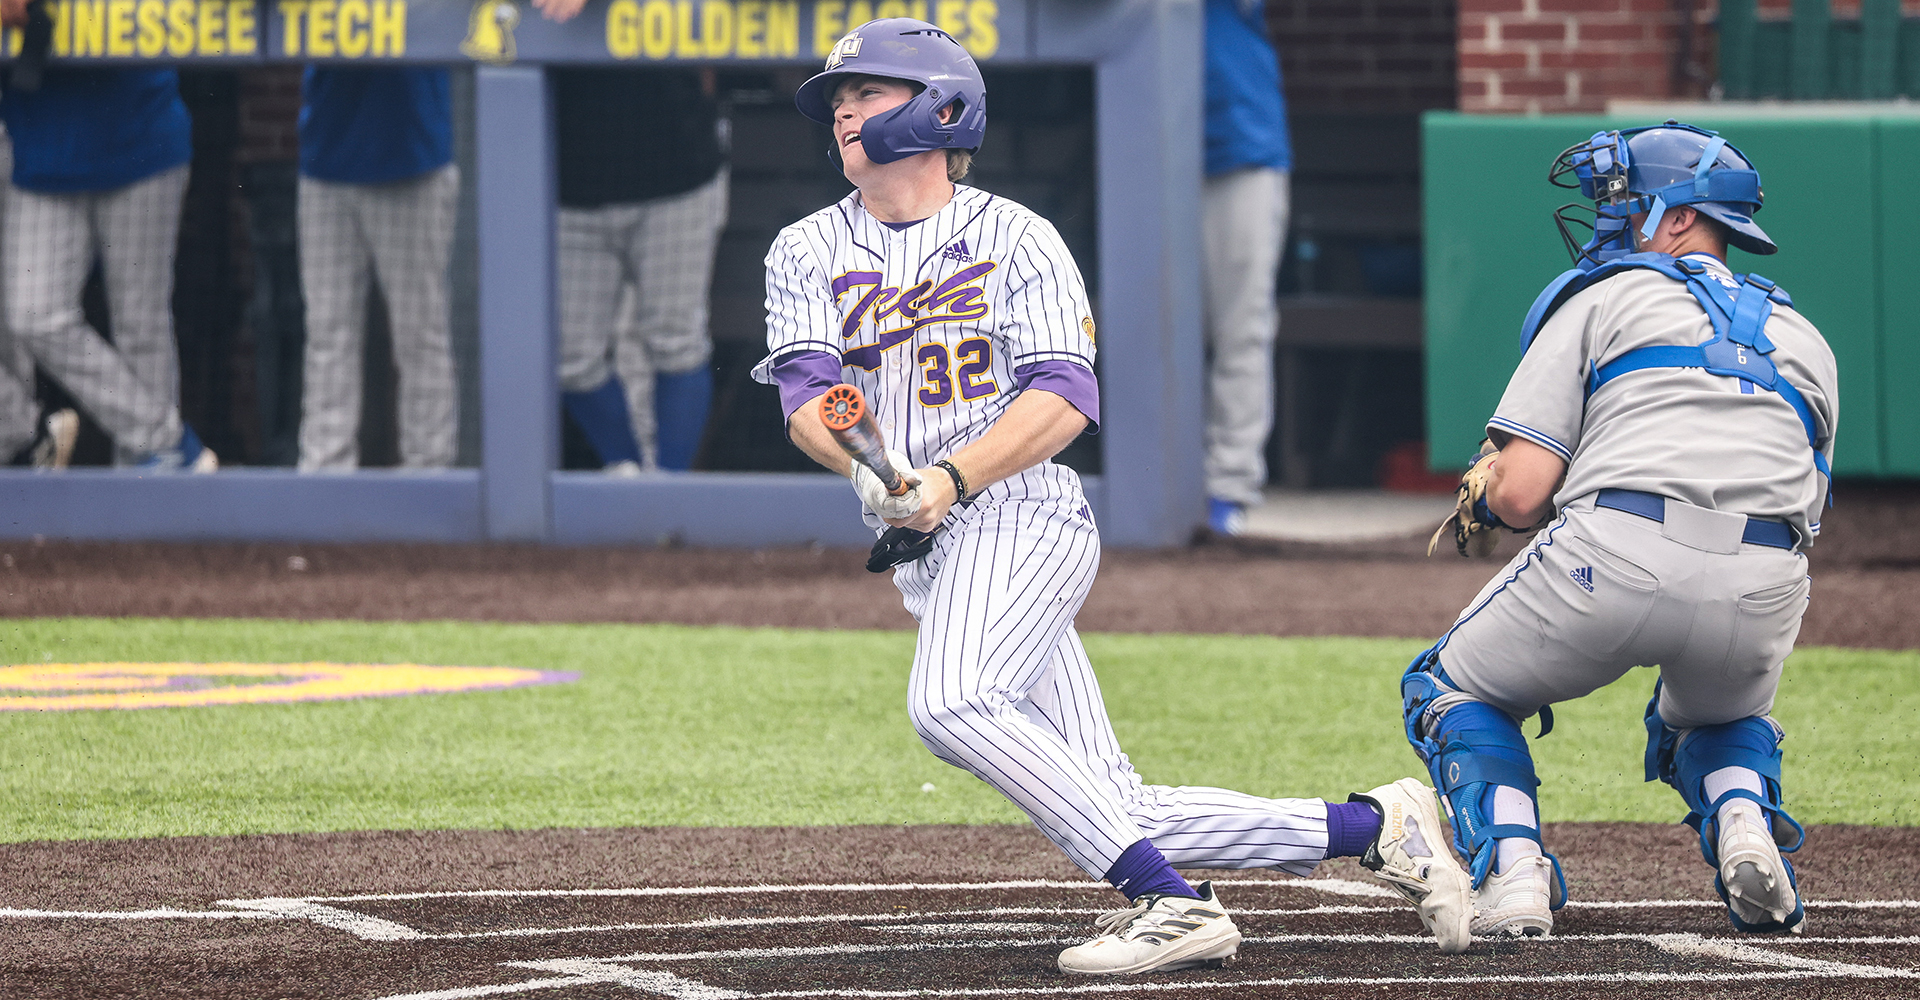 Panthers take series opener over Golden Eagles